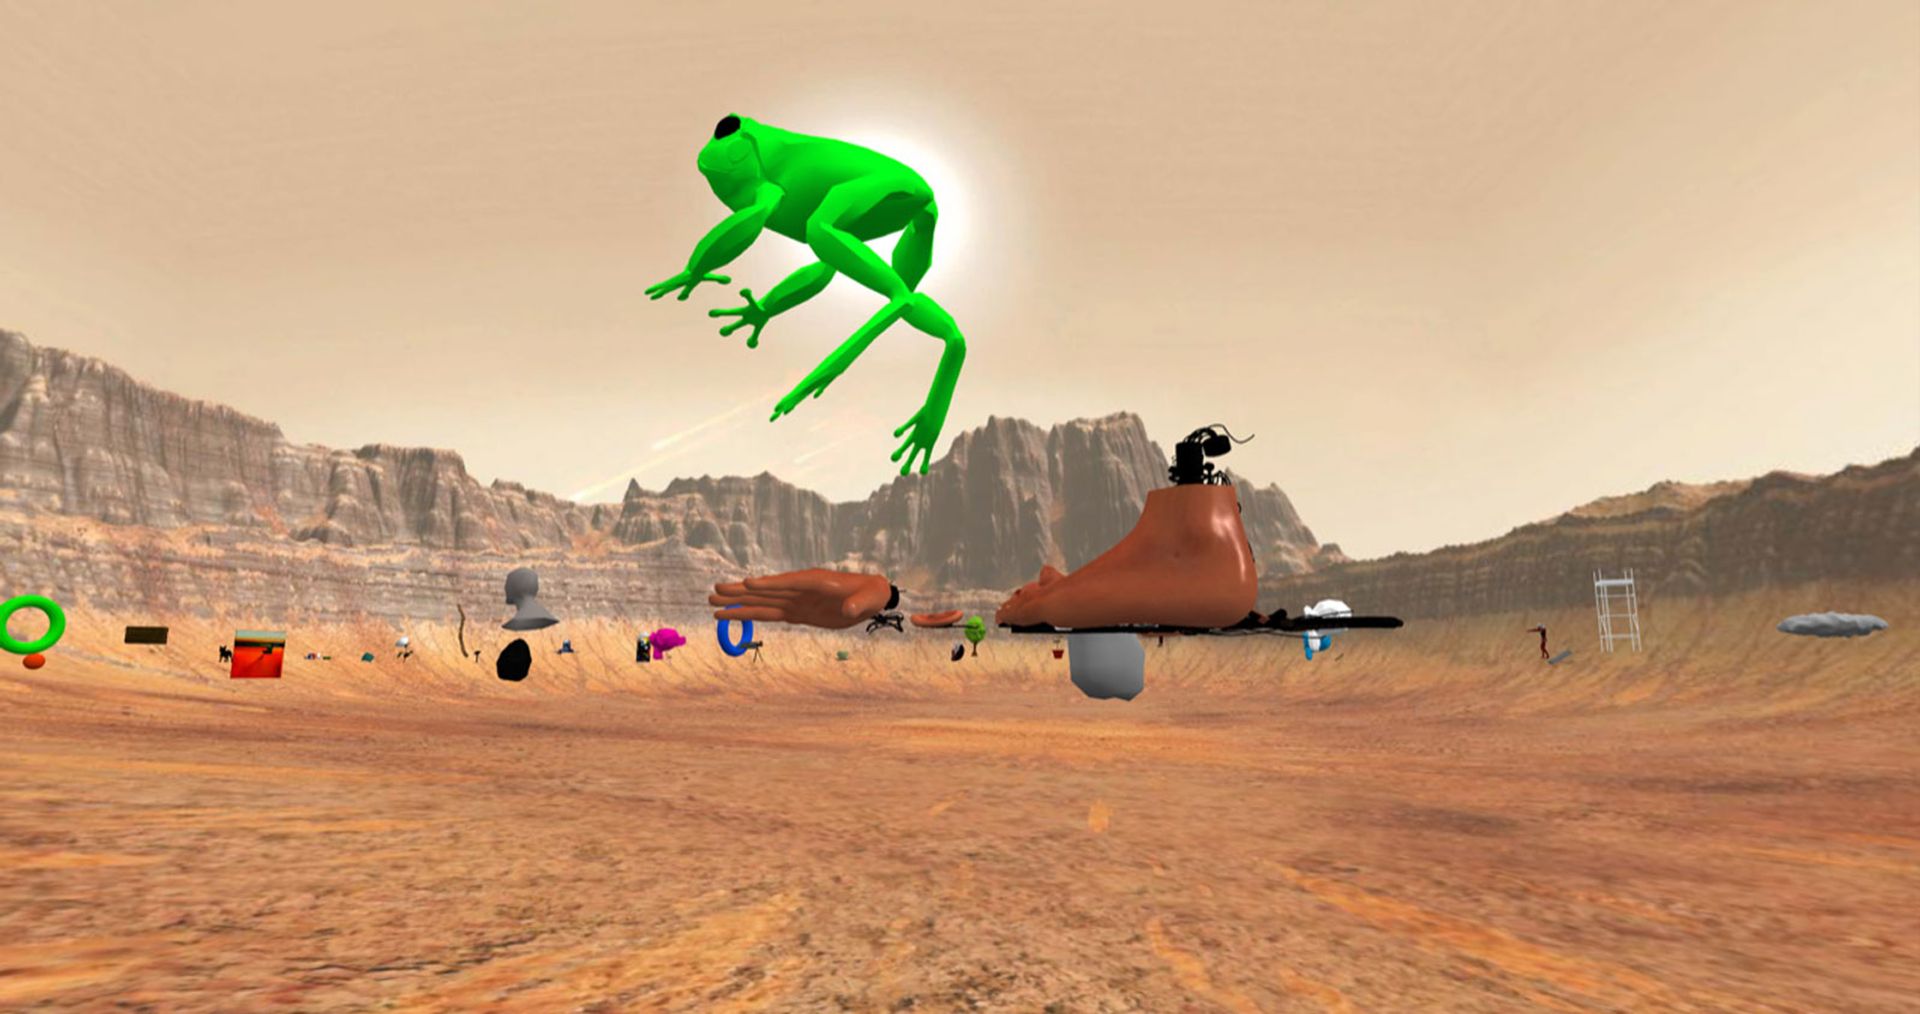 The Liverpool John Moores University BA fine degree show 2020 takes place in a virtual Mars landscape 